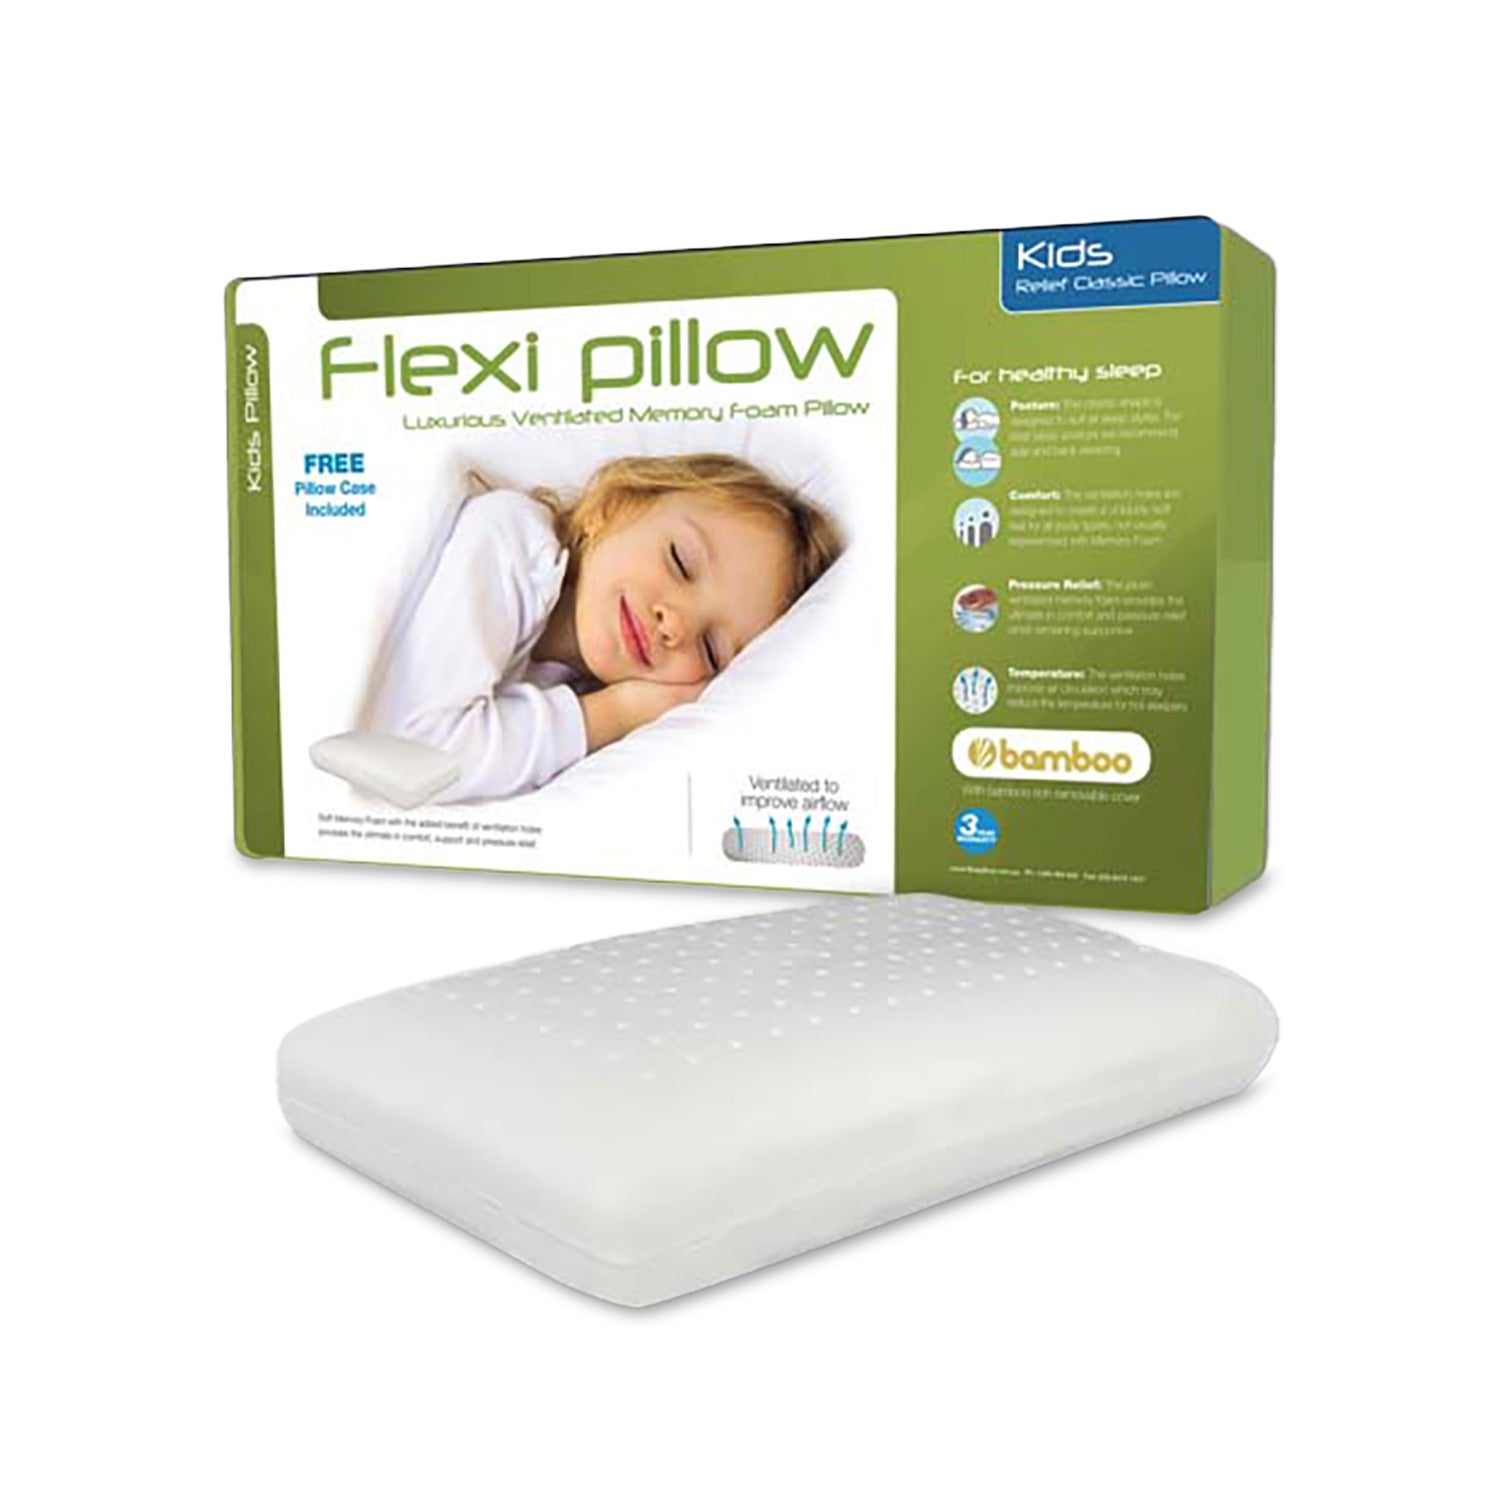 Flexi Pillow - Relief Classic Kids Pillow With Bamboo